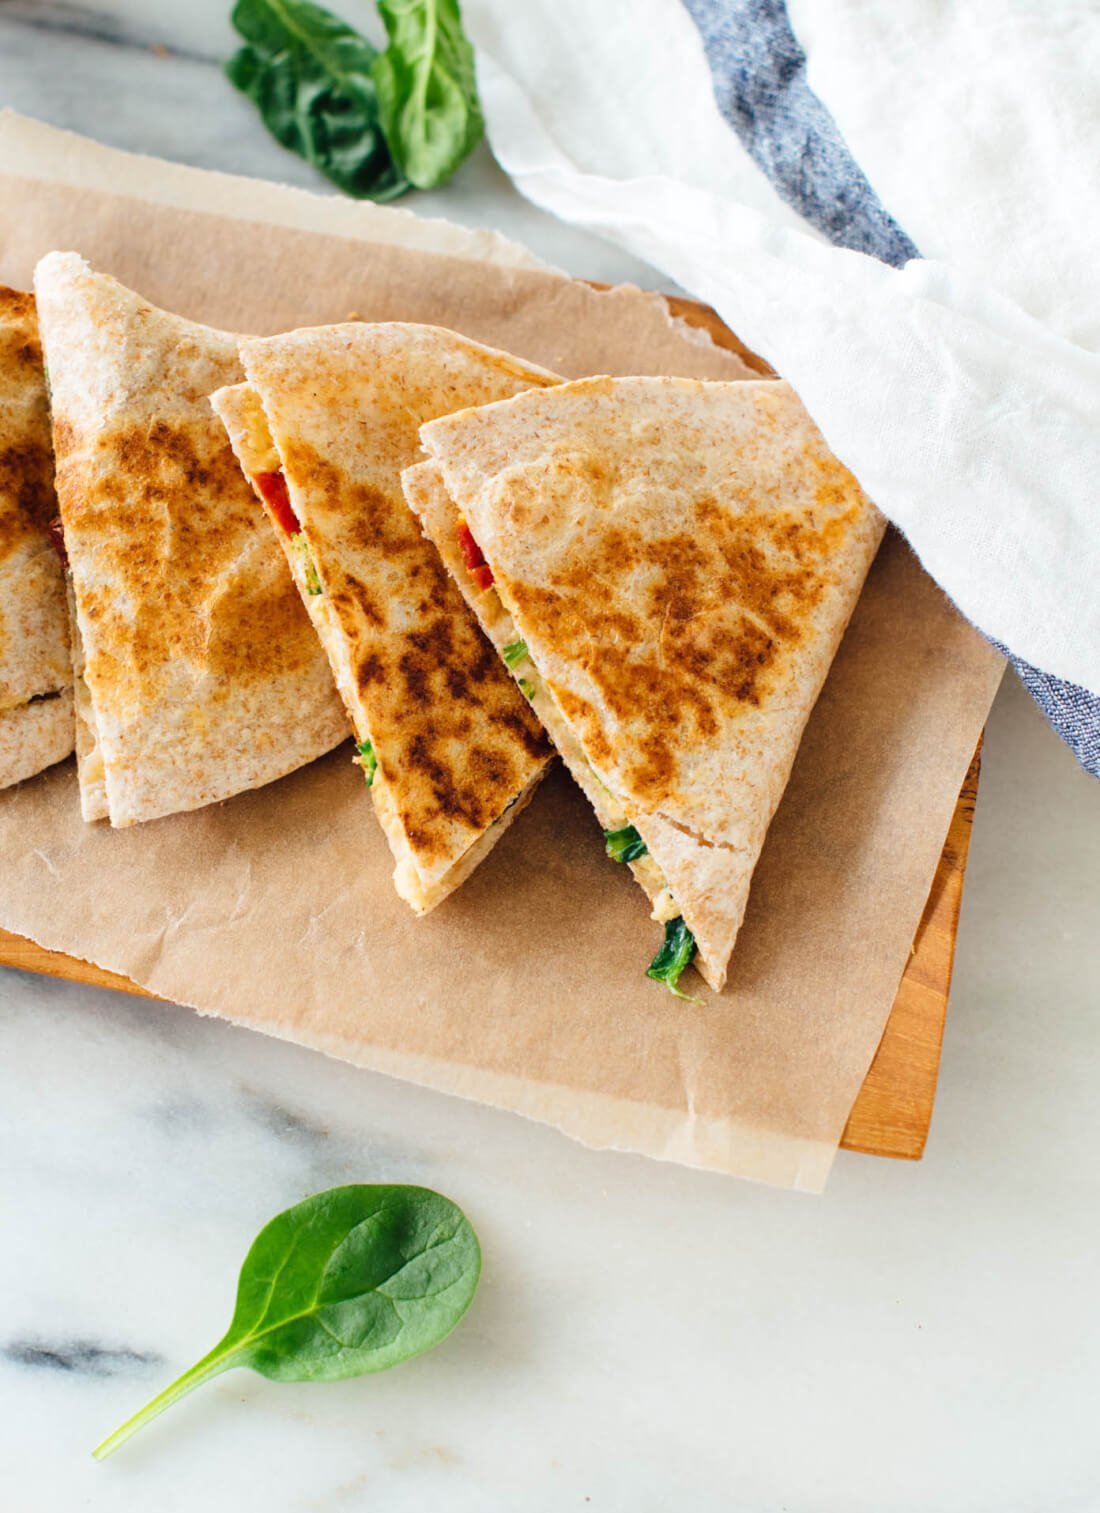 Quesadillas made with hummus, not cheese! These are a healthy, hearty snack or meal.